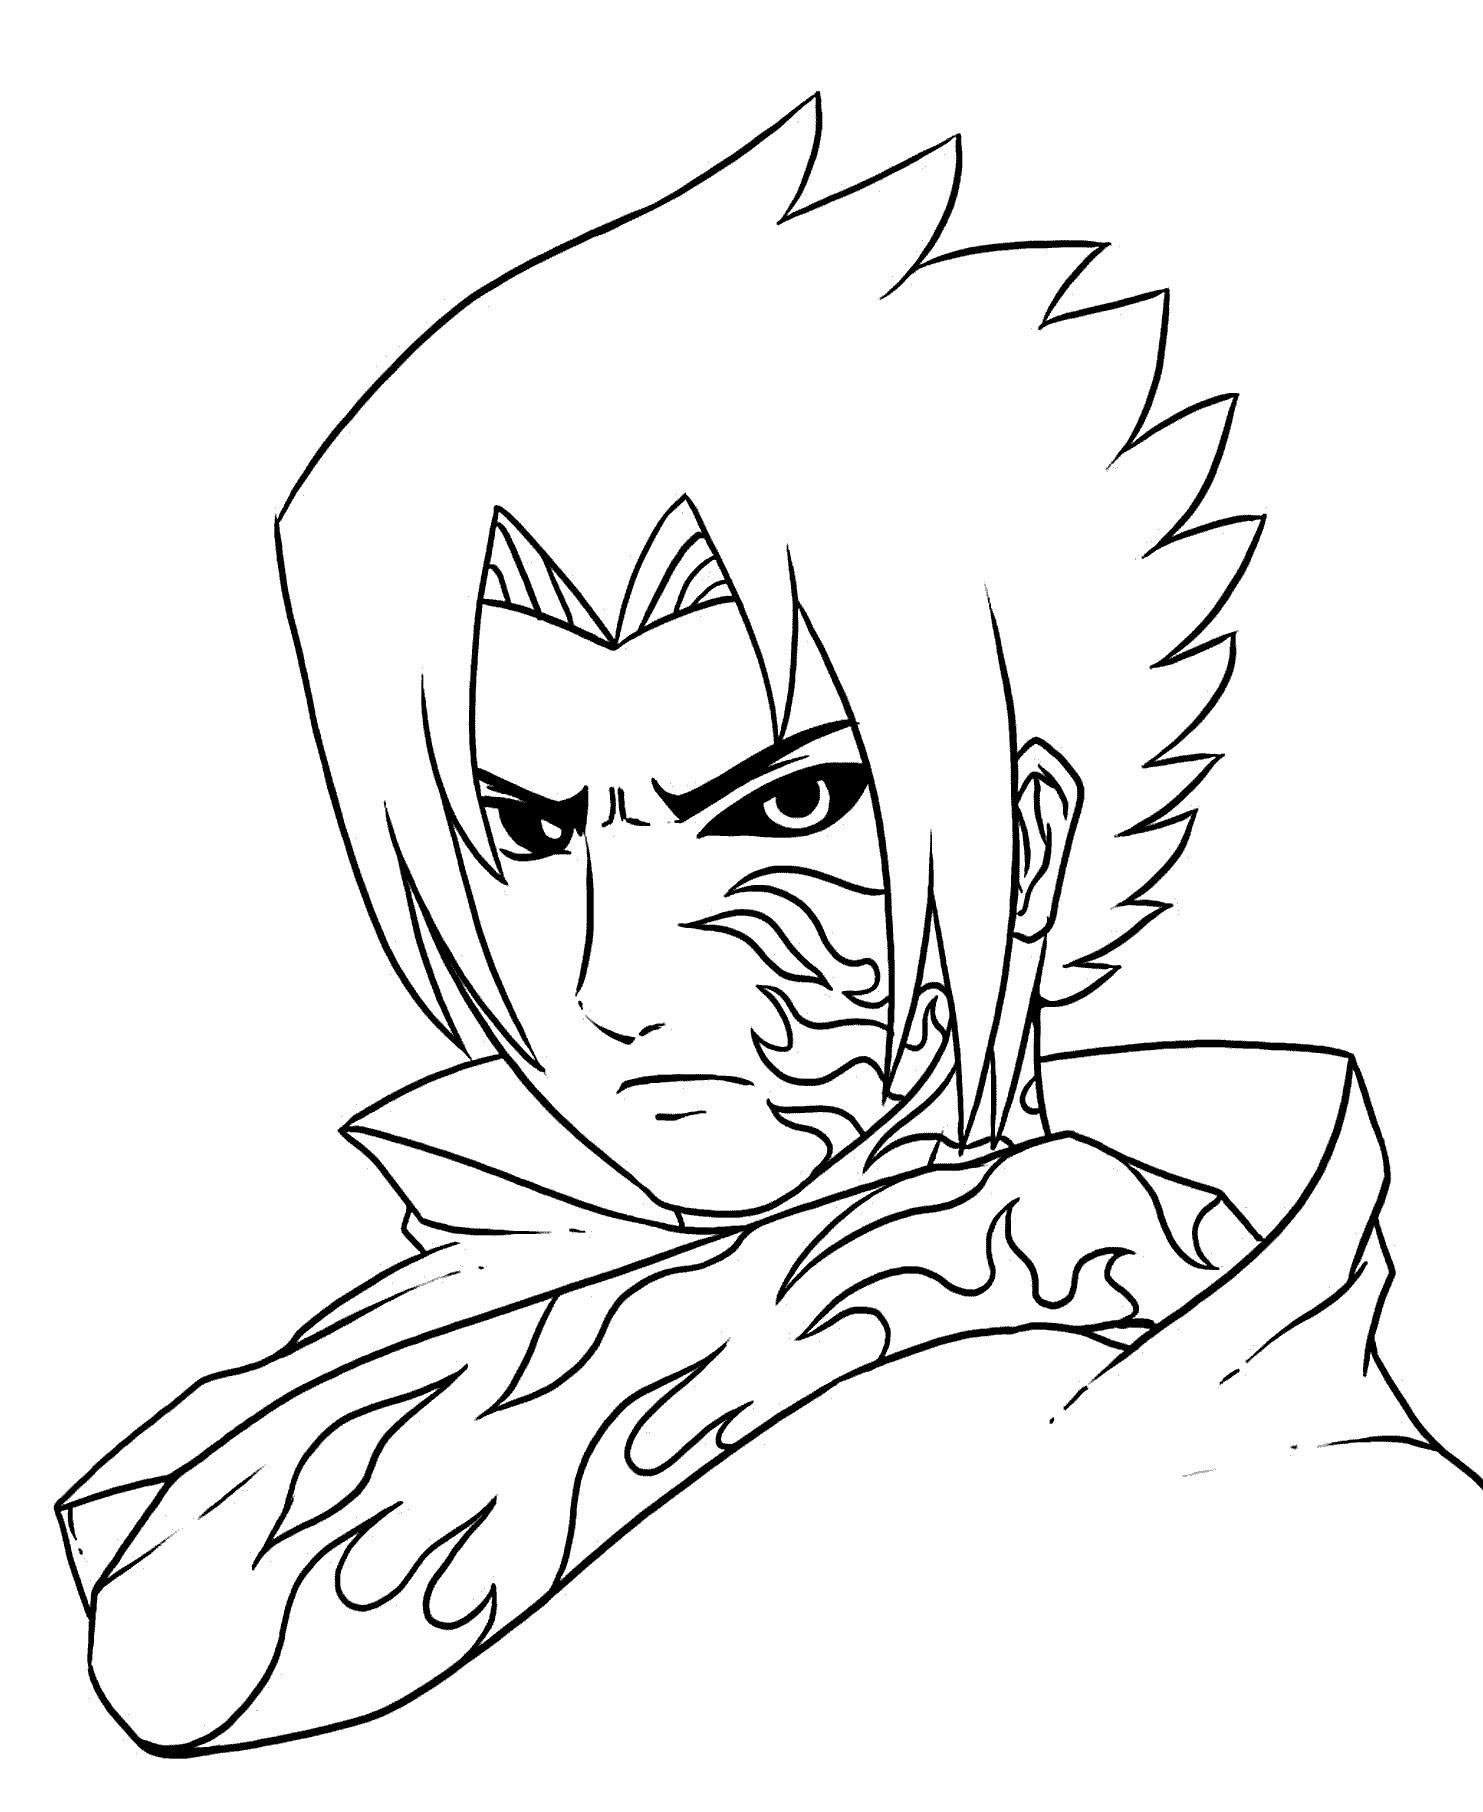 Awesome Sasuke Coloring Page - Free Printable Coloring Pages for Kids